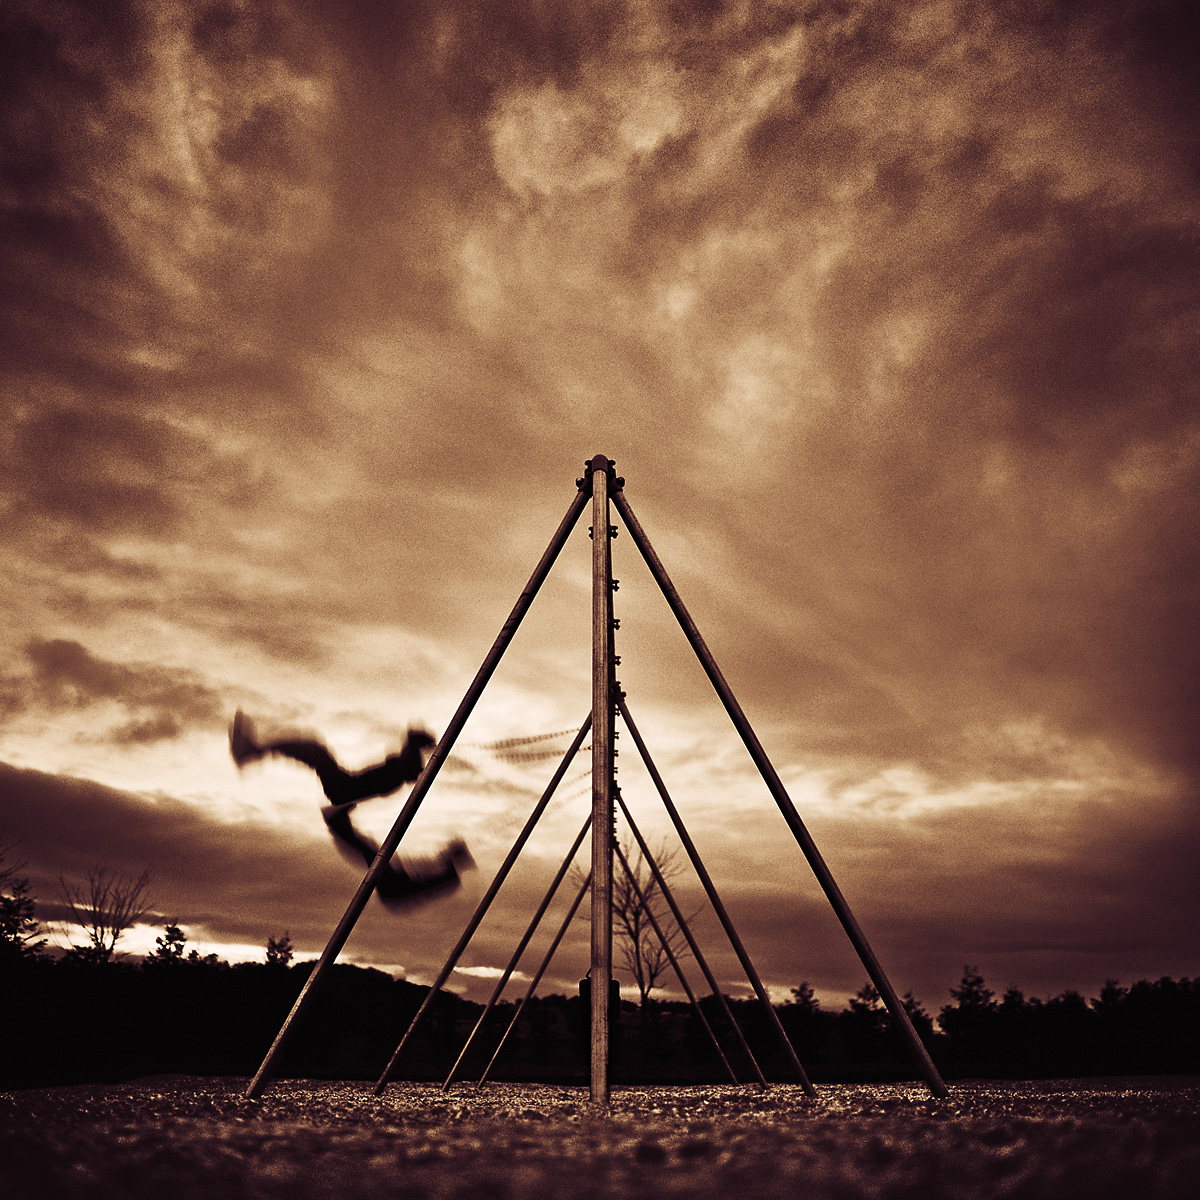 Stephen Austin Welch advertising fine art landscape photographer boys on swings B&W black and white moody dramatic photograph